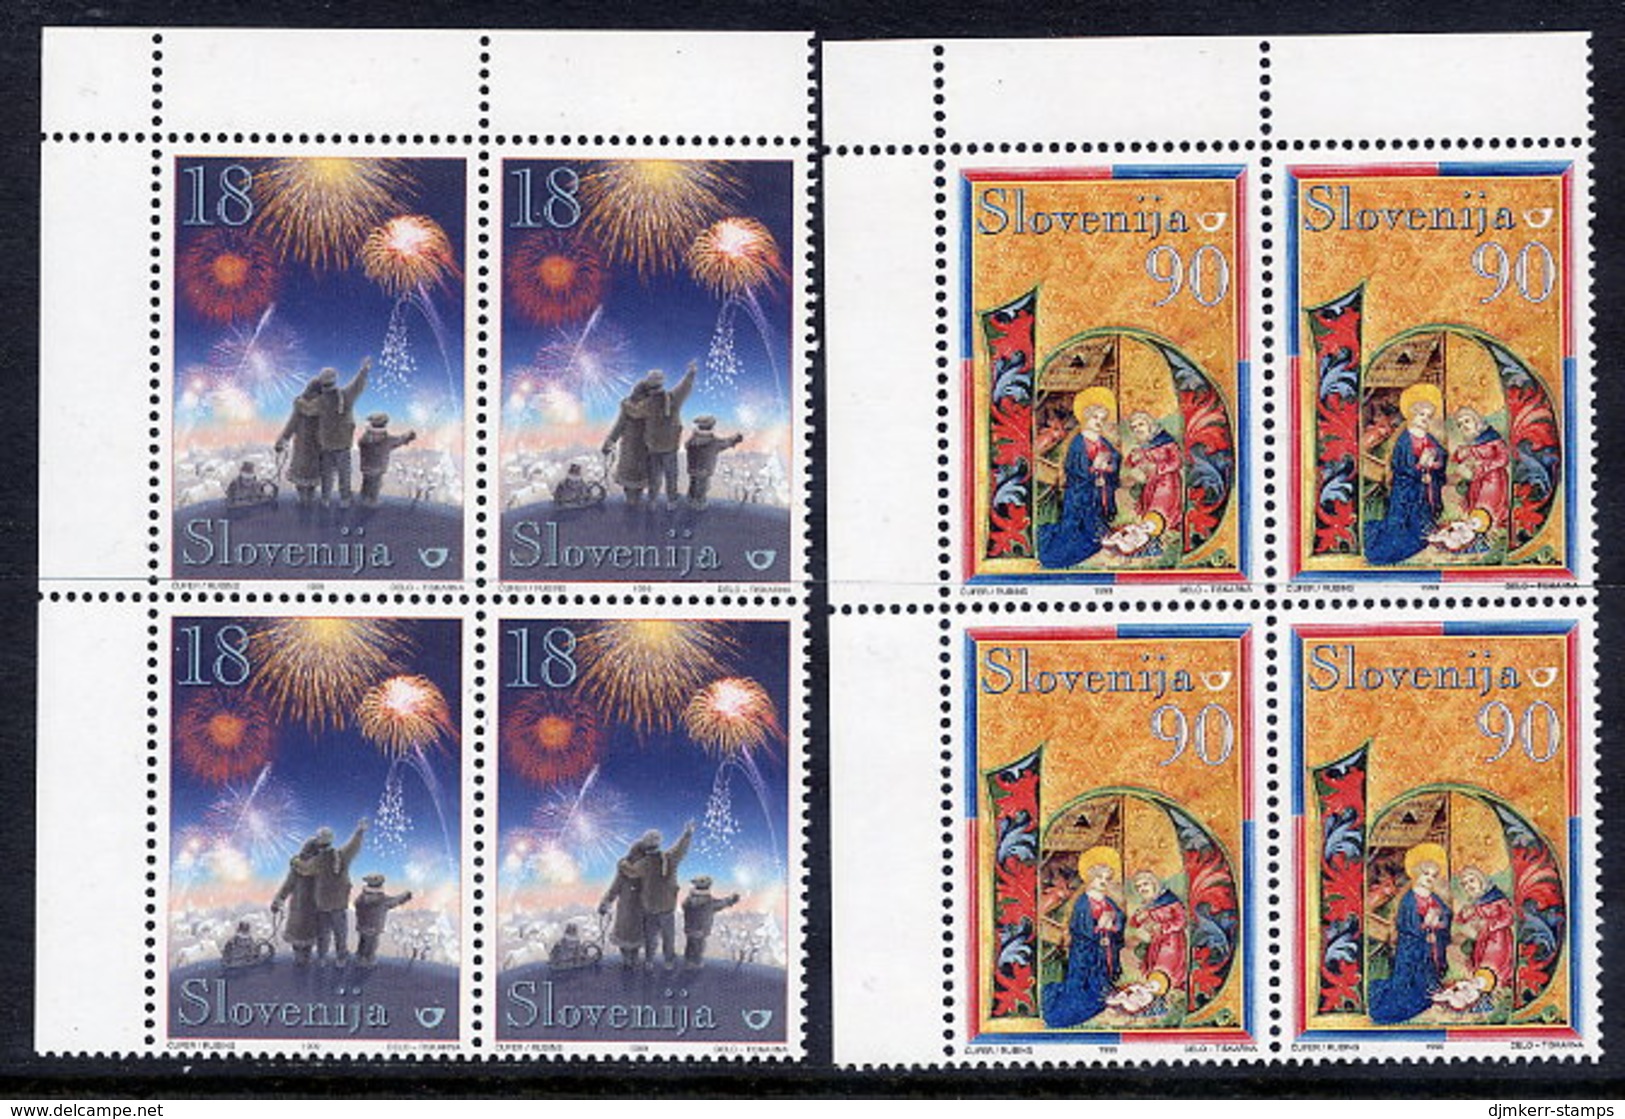 SLOVENIA 1999 Christmas 18 T. And 90 T. From Sheets Blocks Of 4 MNH / **.  Michel 277, 279 - Slovénie